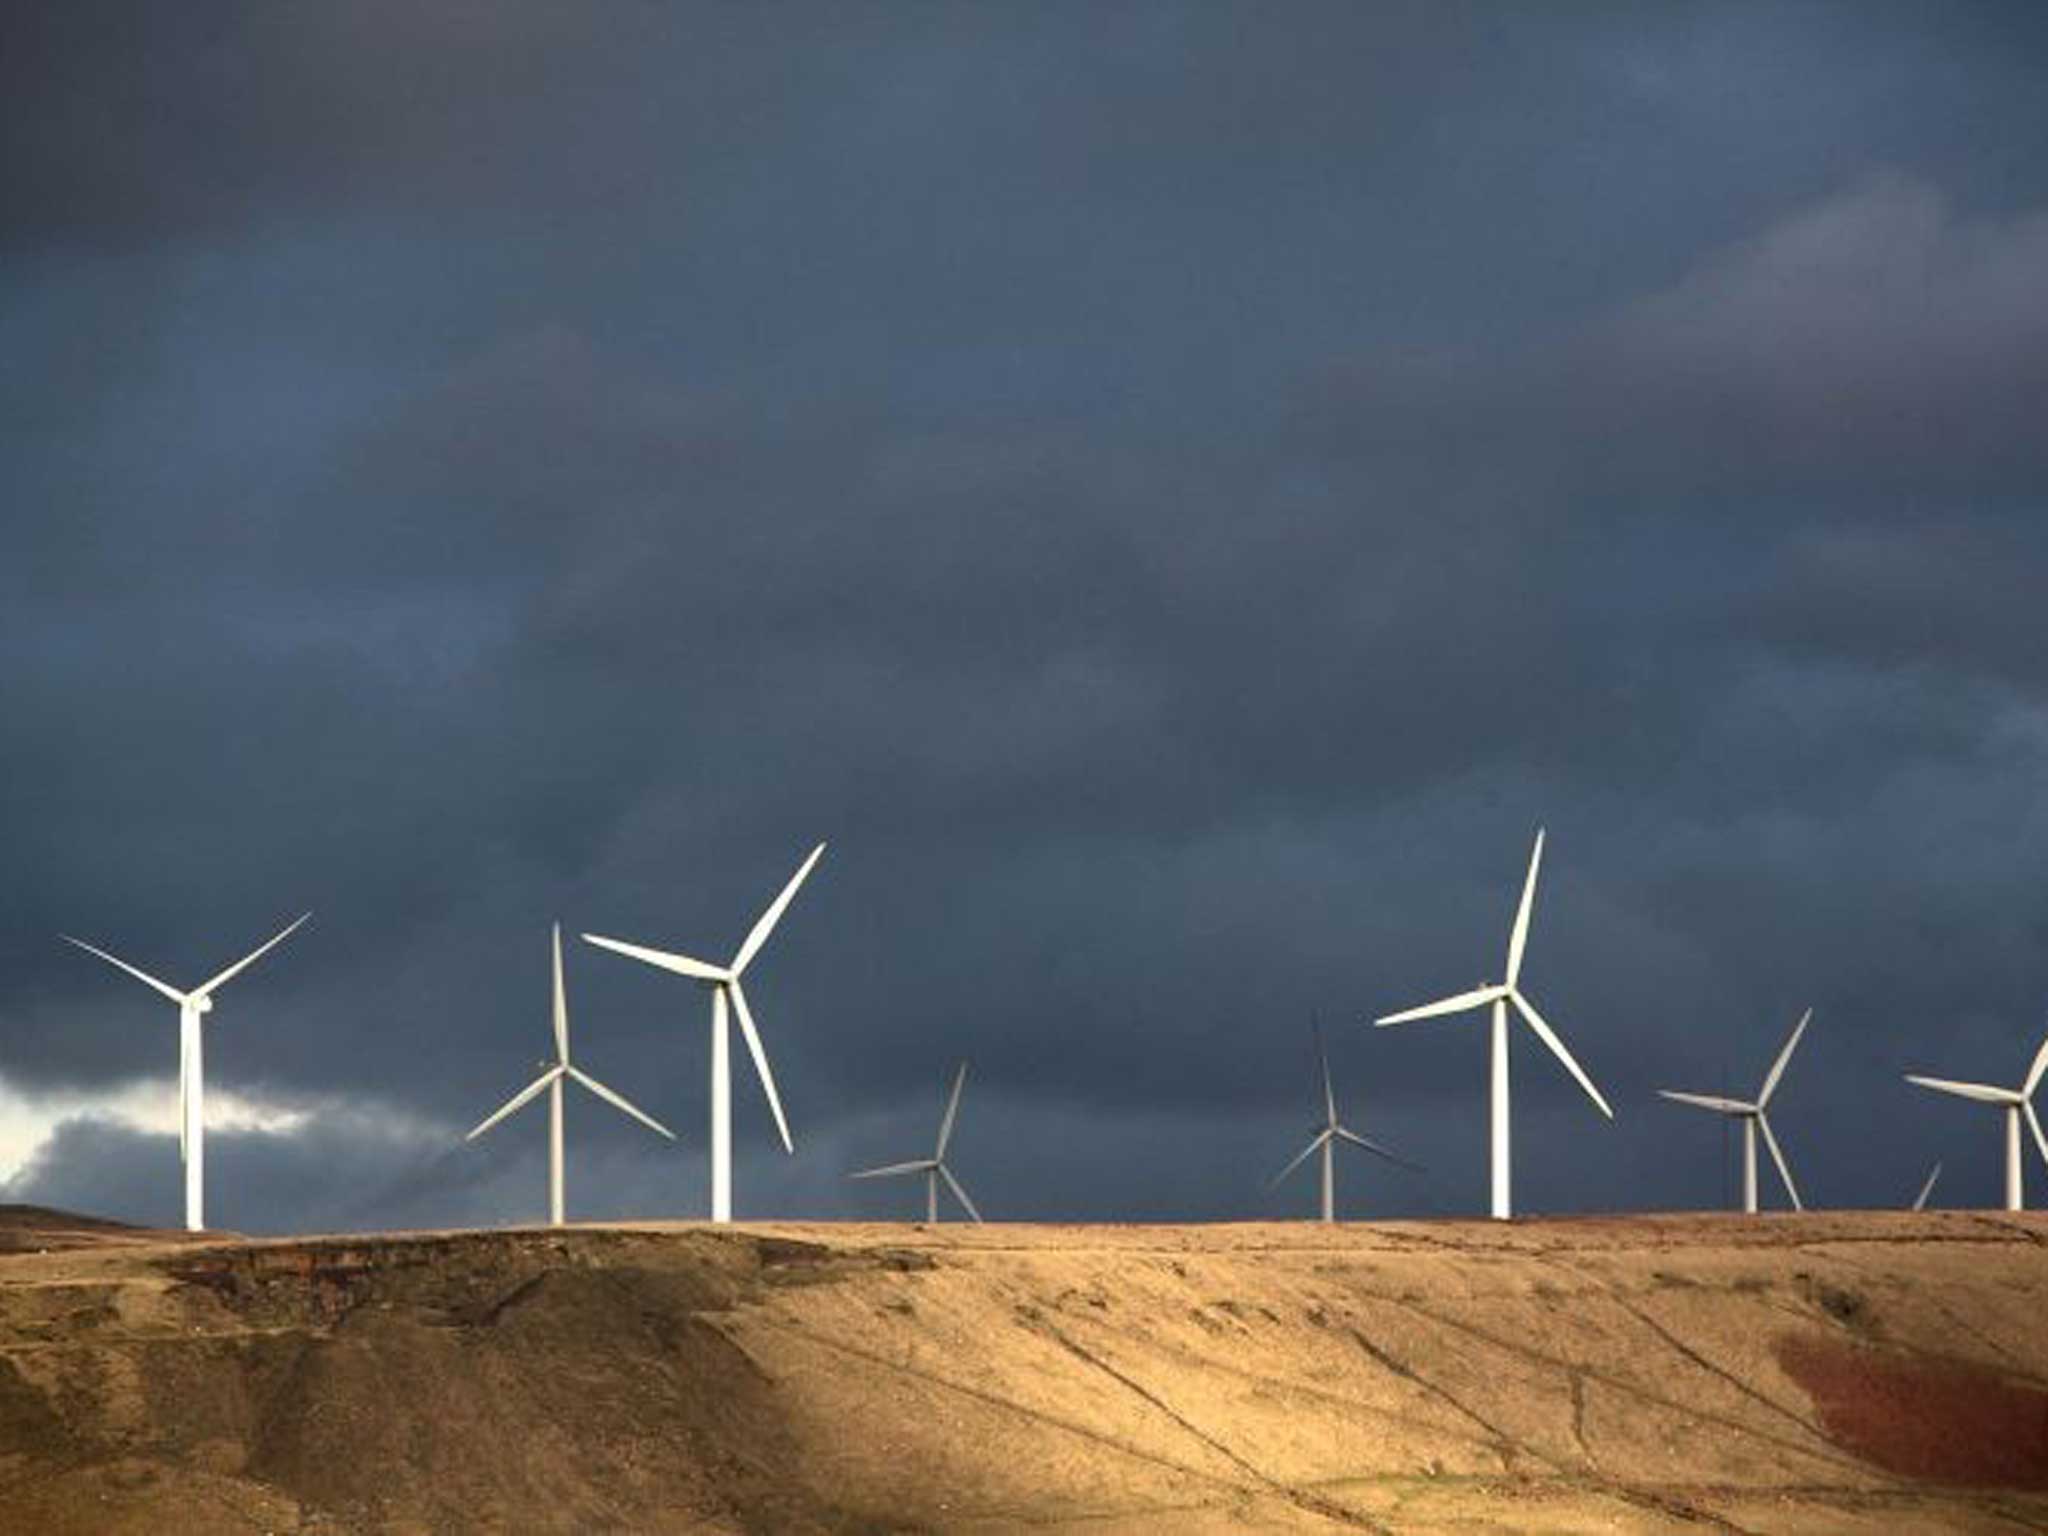 The turbine sails of the Scout Moor Wind Farm in the Pennines dominate the skyline